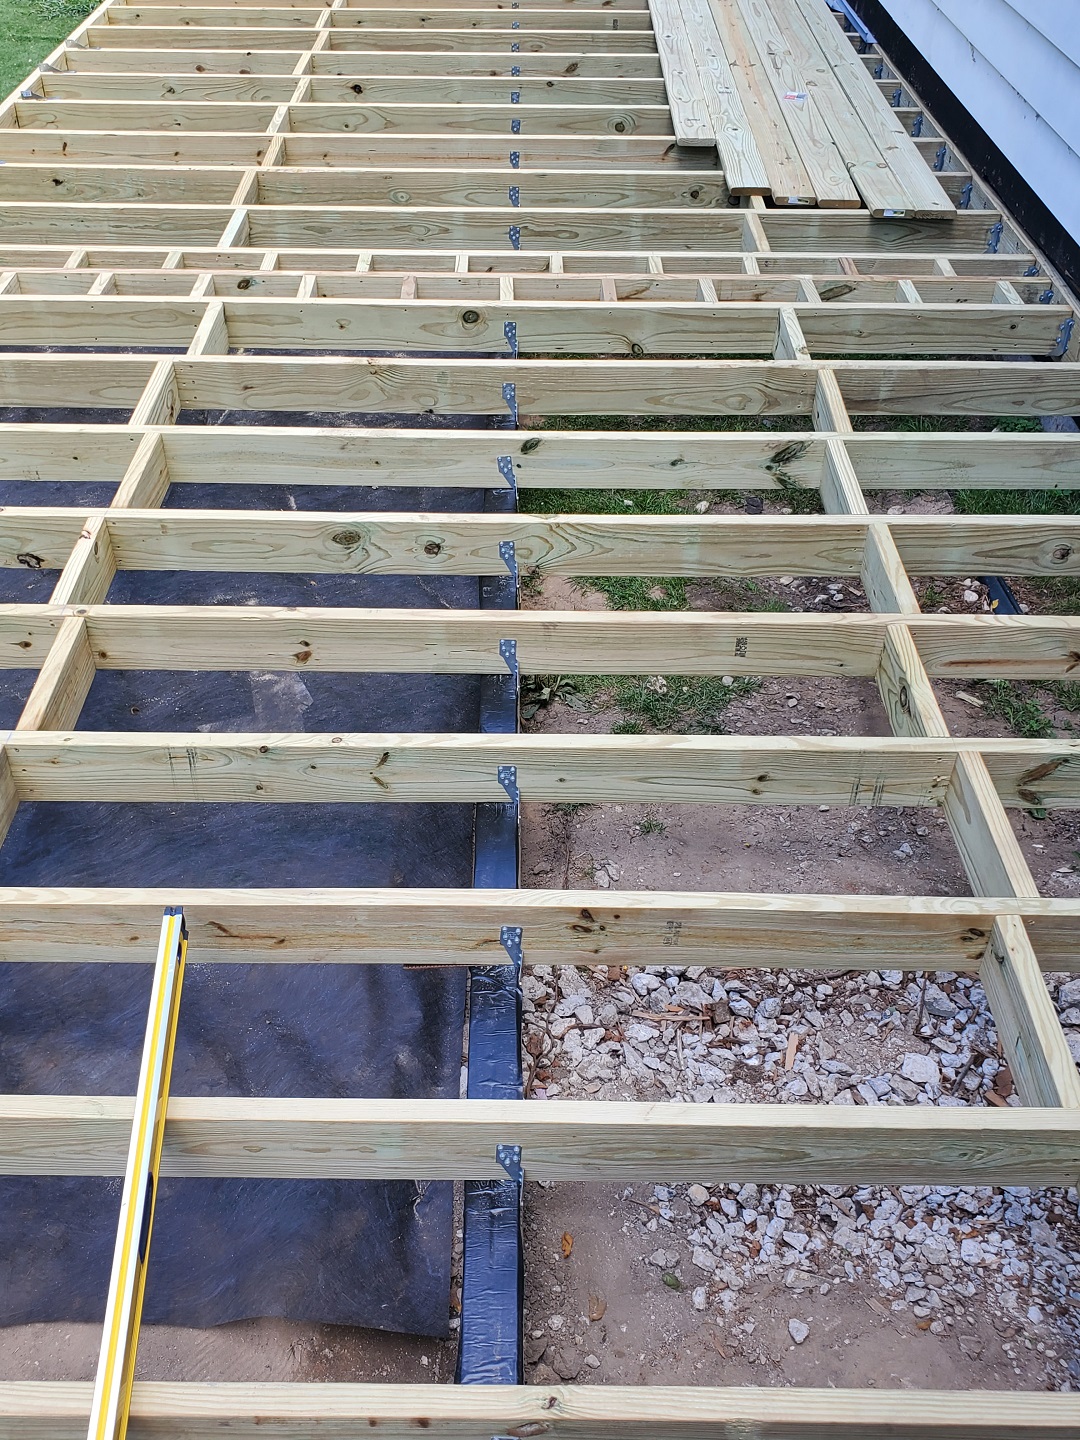 Deck joists exposed